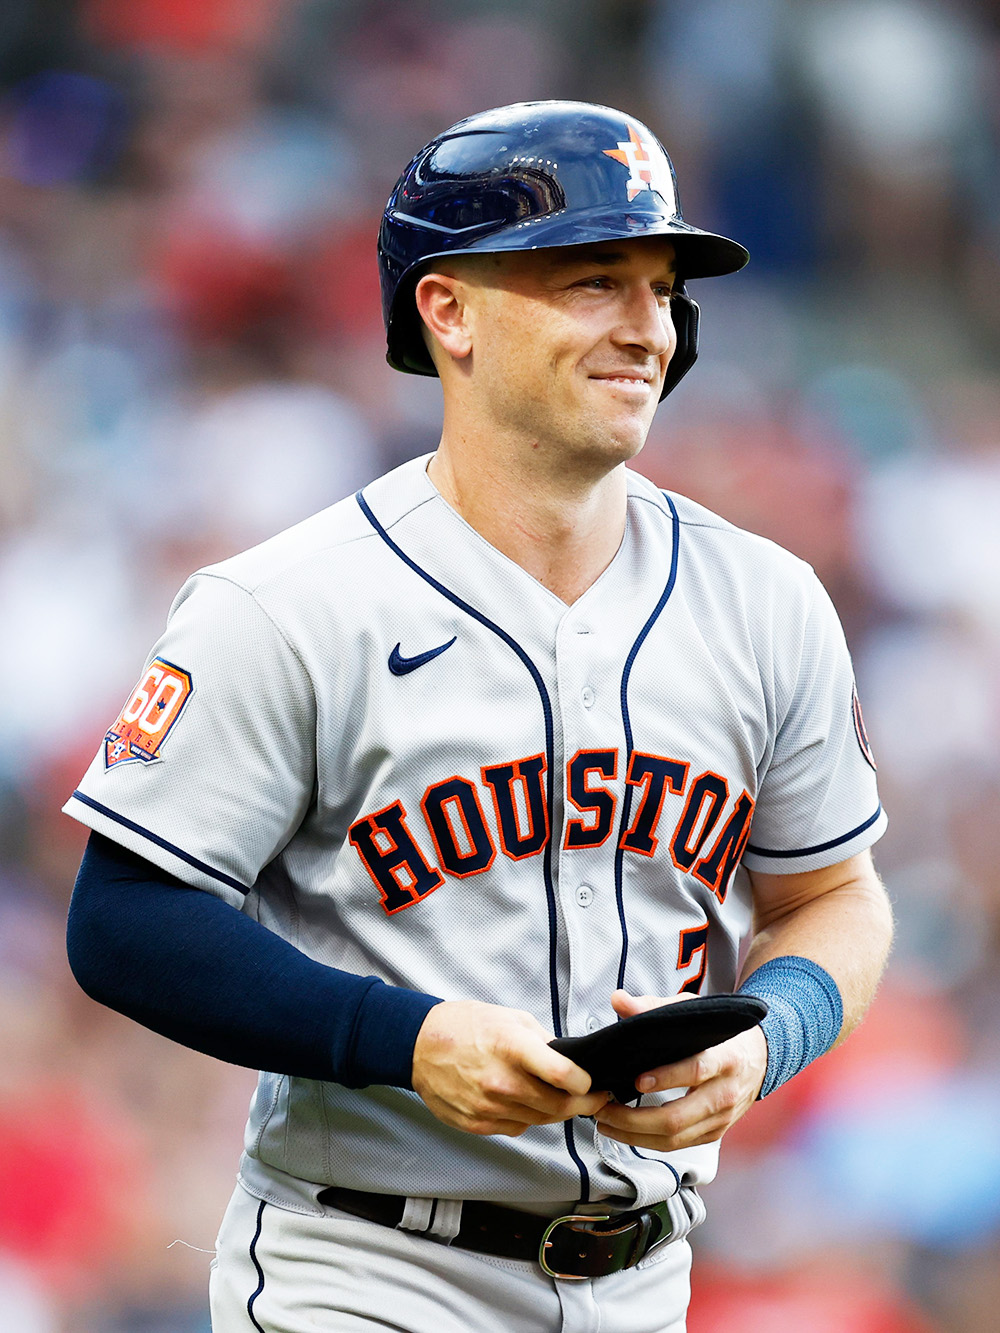 Alex Bregman's flannel shirt could be lucky charm for Astros - ABC13 Houston